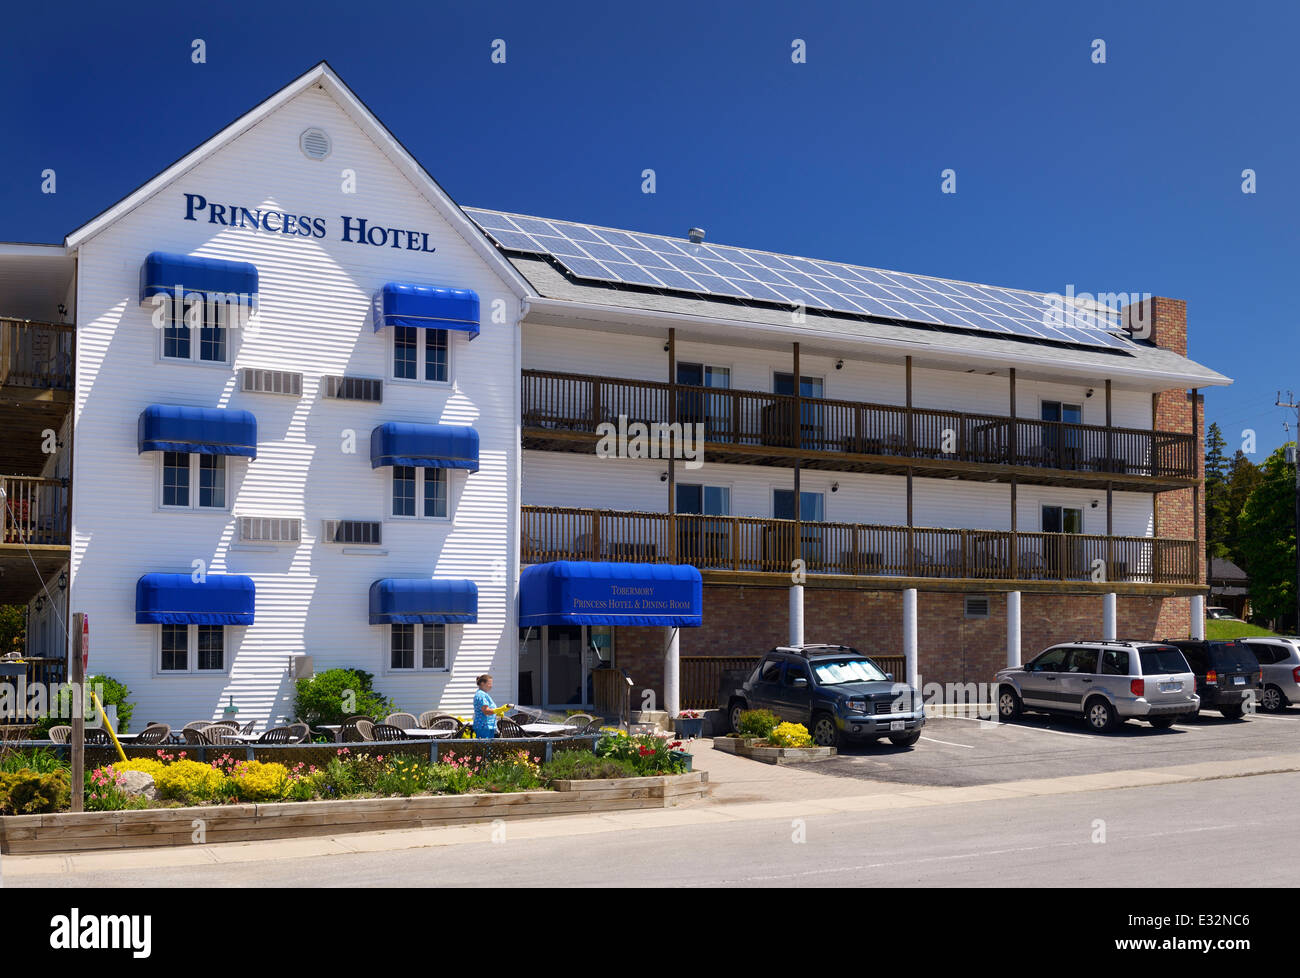 Princess Hotel with solar panels on the roof. Tobermory, Ontario, Canada Stock Photo